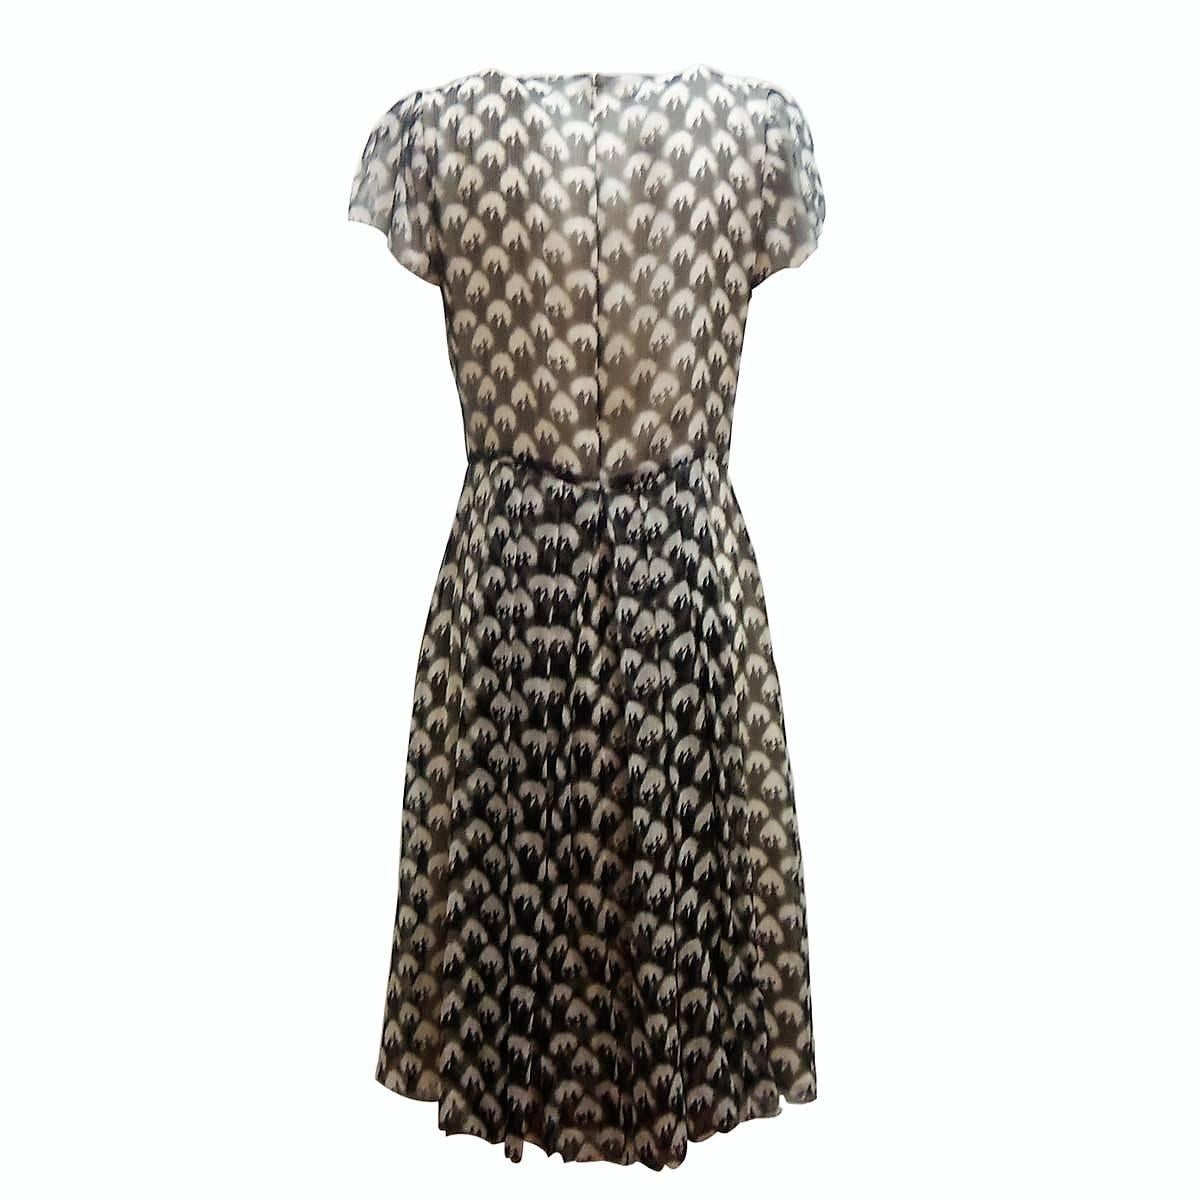 Beautiful Jason Wu dress
Silk
'800 Noblewoman pattern
Grey and cream color
With undervest
Total lenght (shoulder/hem) cm 103 (40.5 inches)
Made in Italy
Worldwide express shipping included in the price !